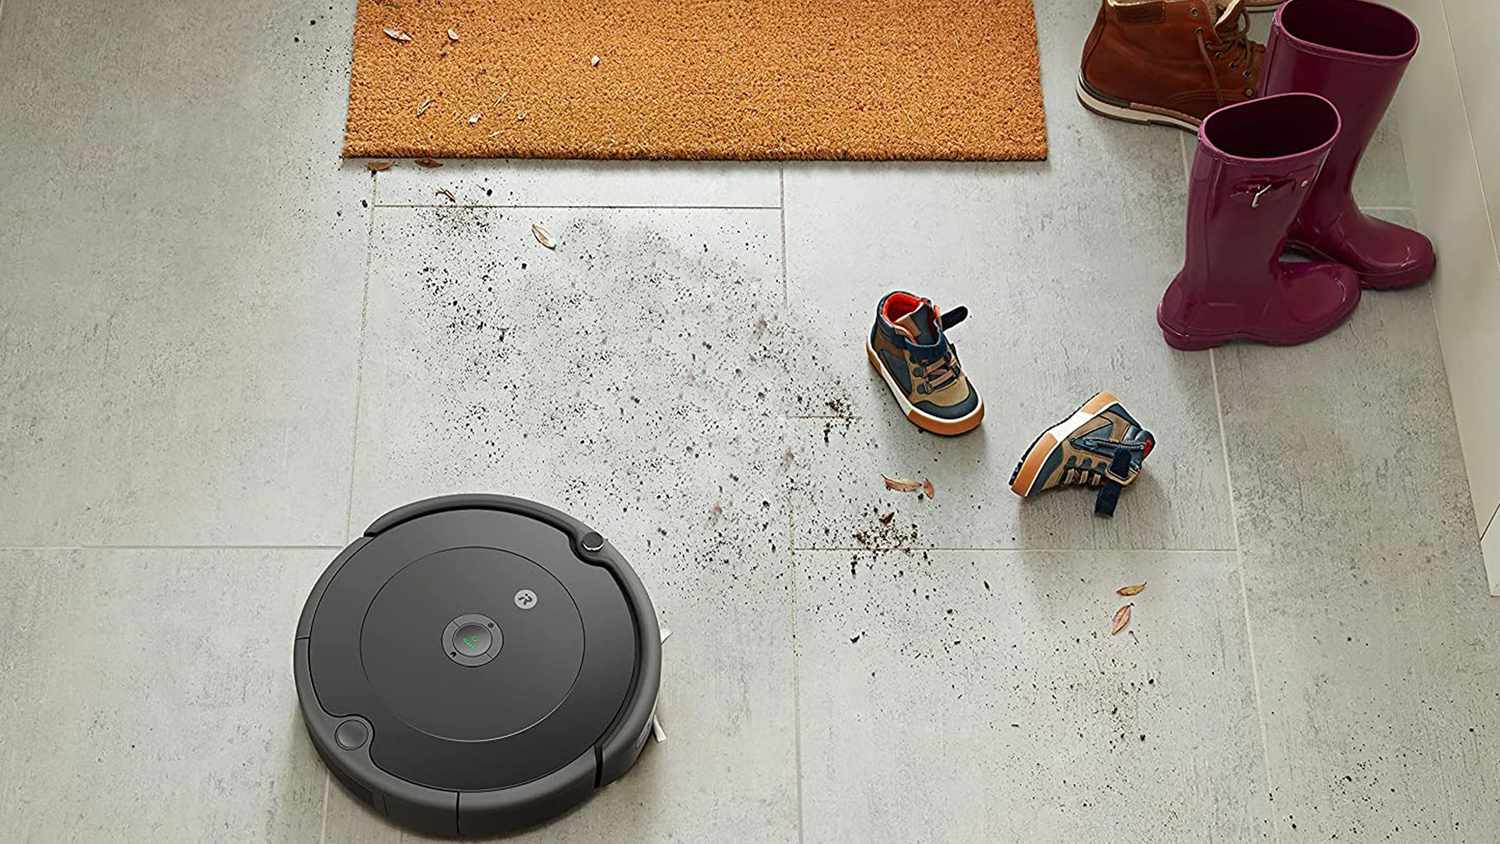 iRobot Roomba 692 Robot Vacuum-Wi-Fi Connectivity, Personalized Cleaning Recommendations